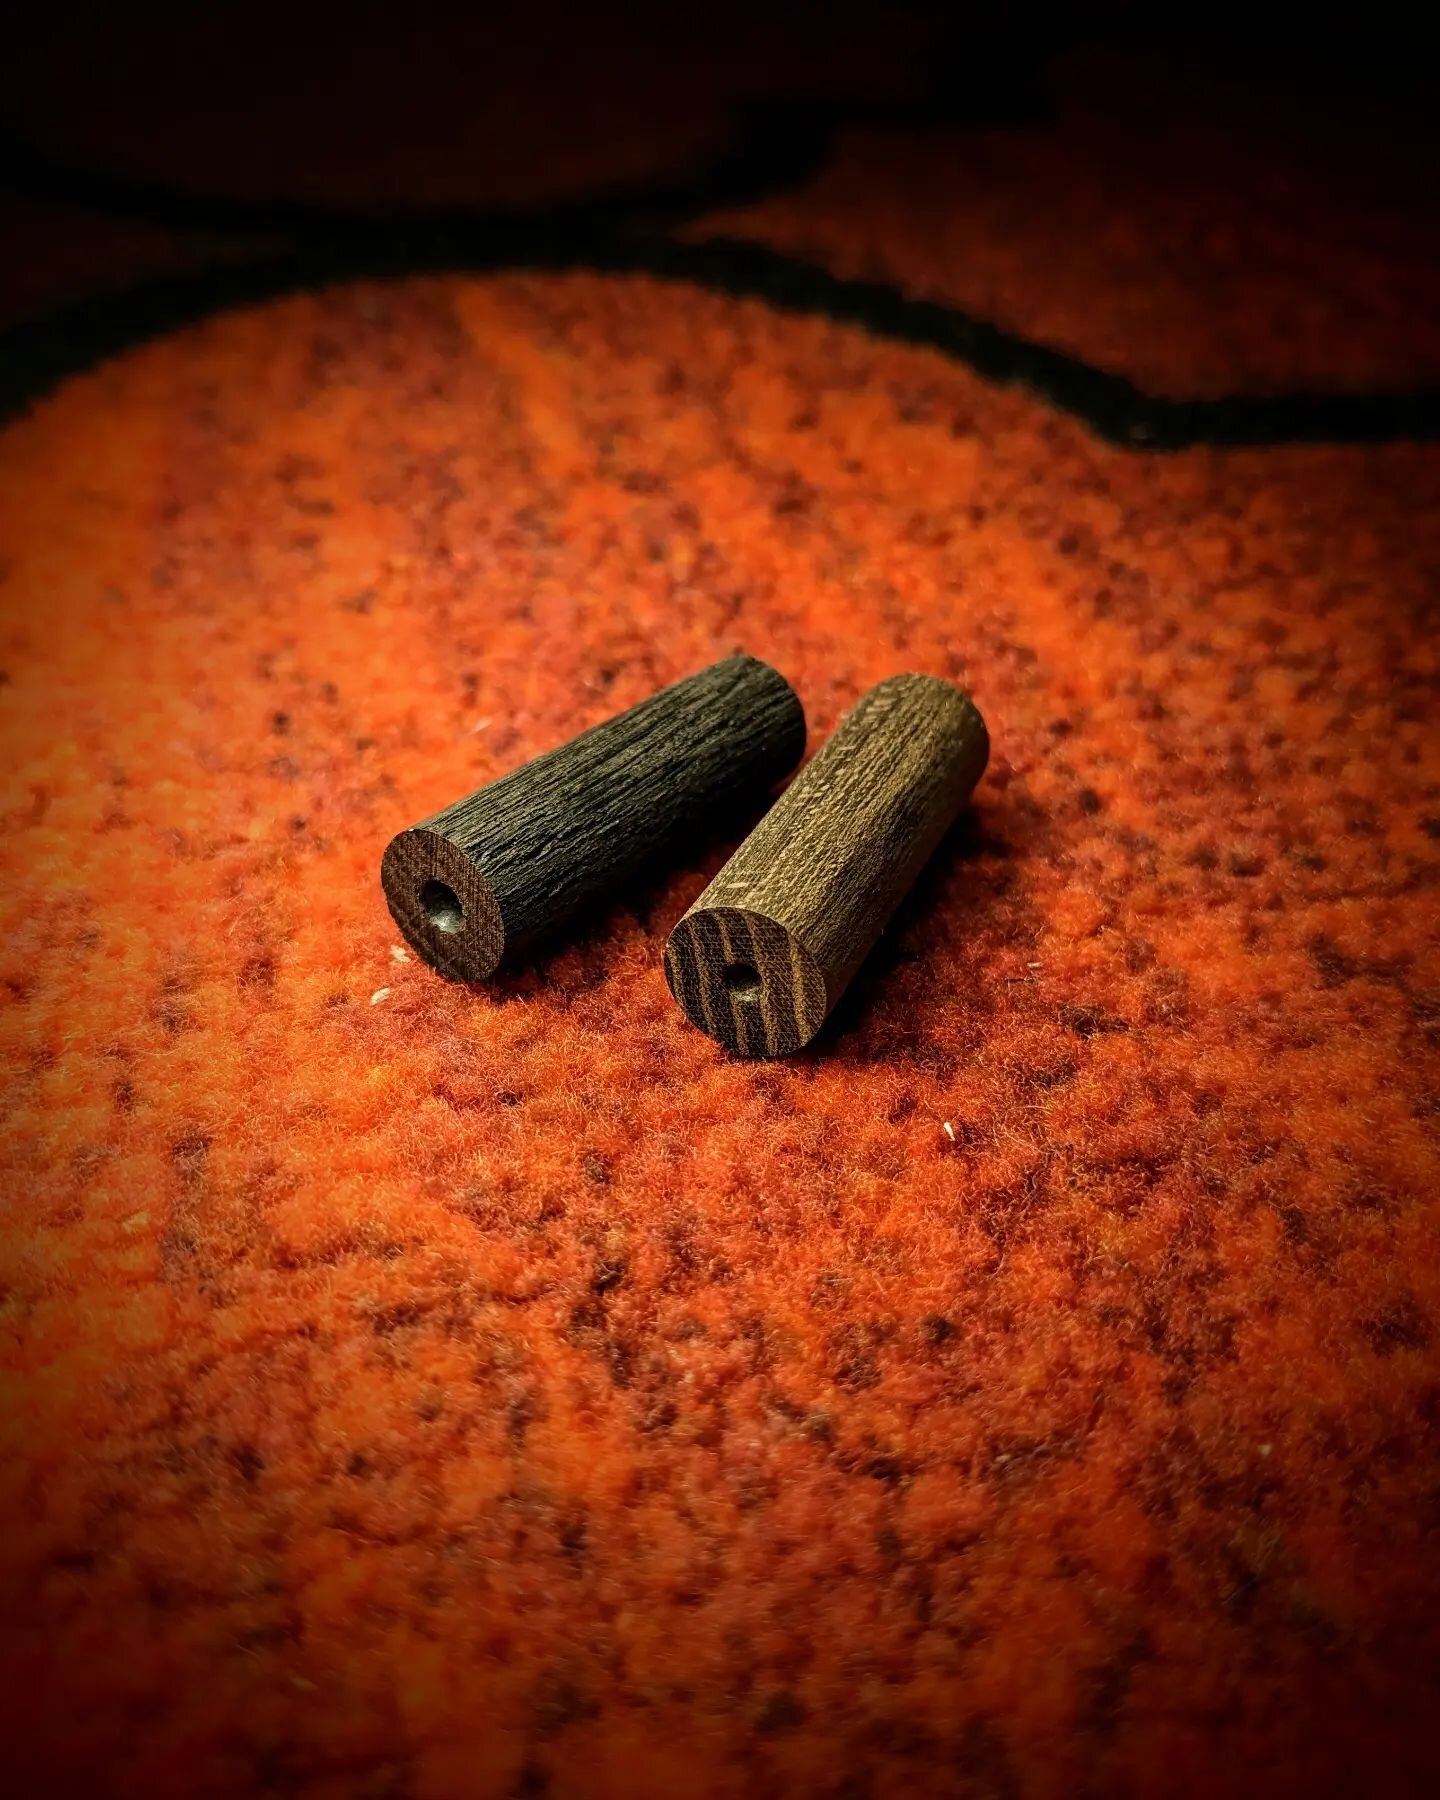 I'm doing a bit of wood turning today for a change of pace. These two blanks will soon become the end-pins/strap buttons for a pair of ukuleles I'm working on. 

The one of the left is 5,000yo Fenland Bog Oak, and the one on the right is Fumed Laburn